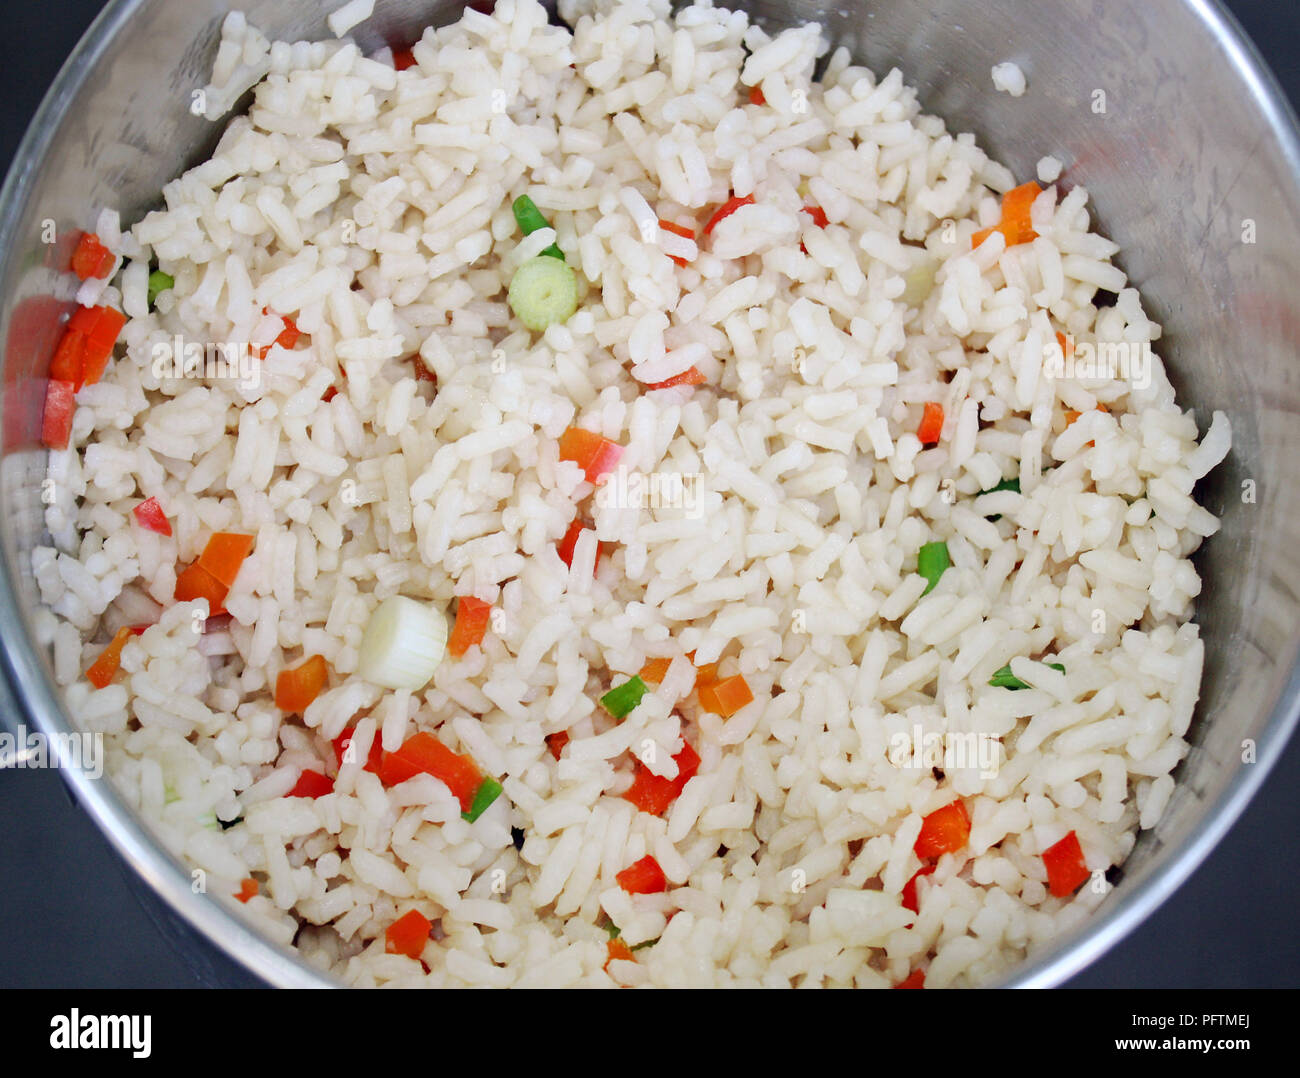 https://c8.alamy.com/comp/PFTMEJ/pot-of-cooked-white-rice-with-diced-red-peppers-and-slices-of-green-onion-PFTMEJ.jpg